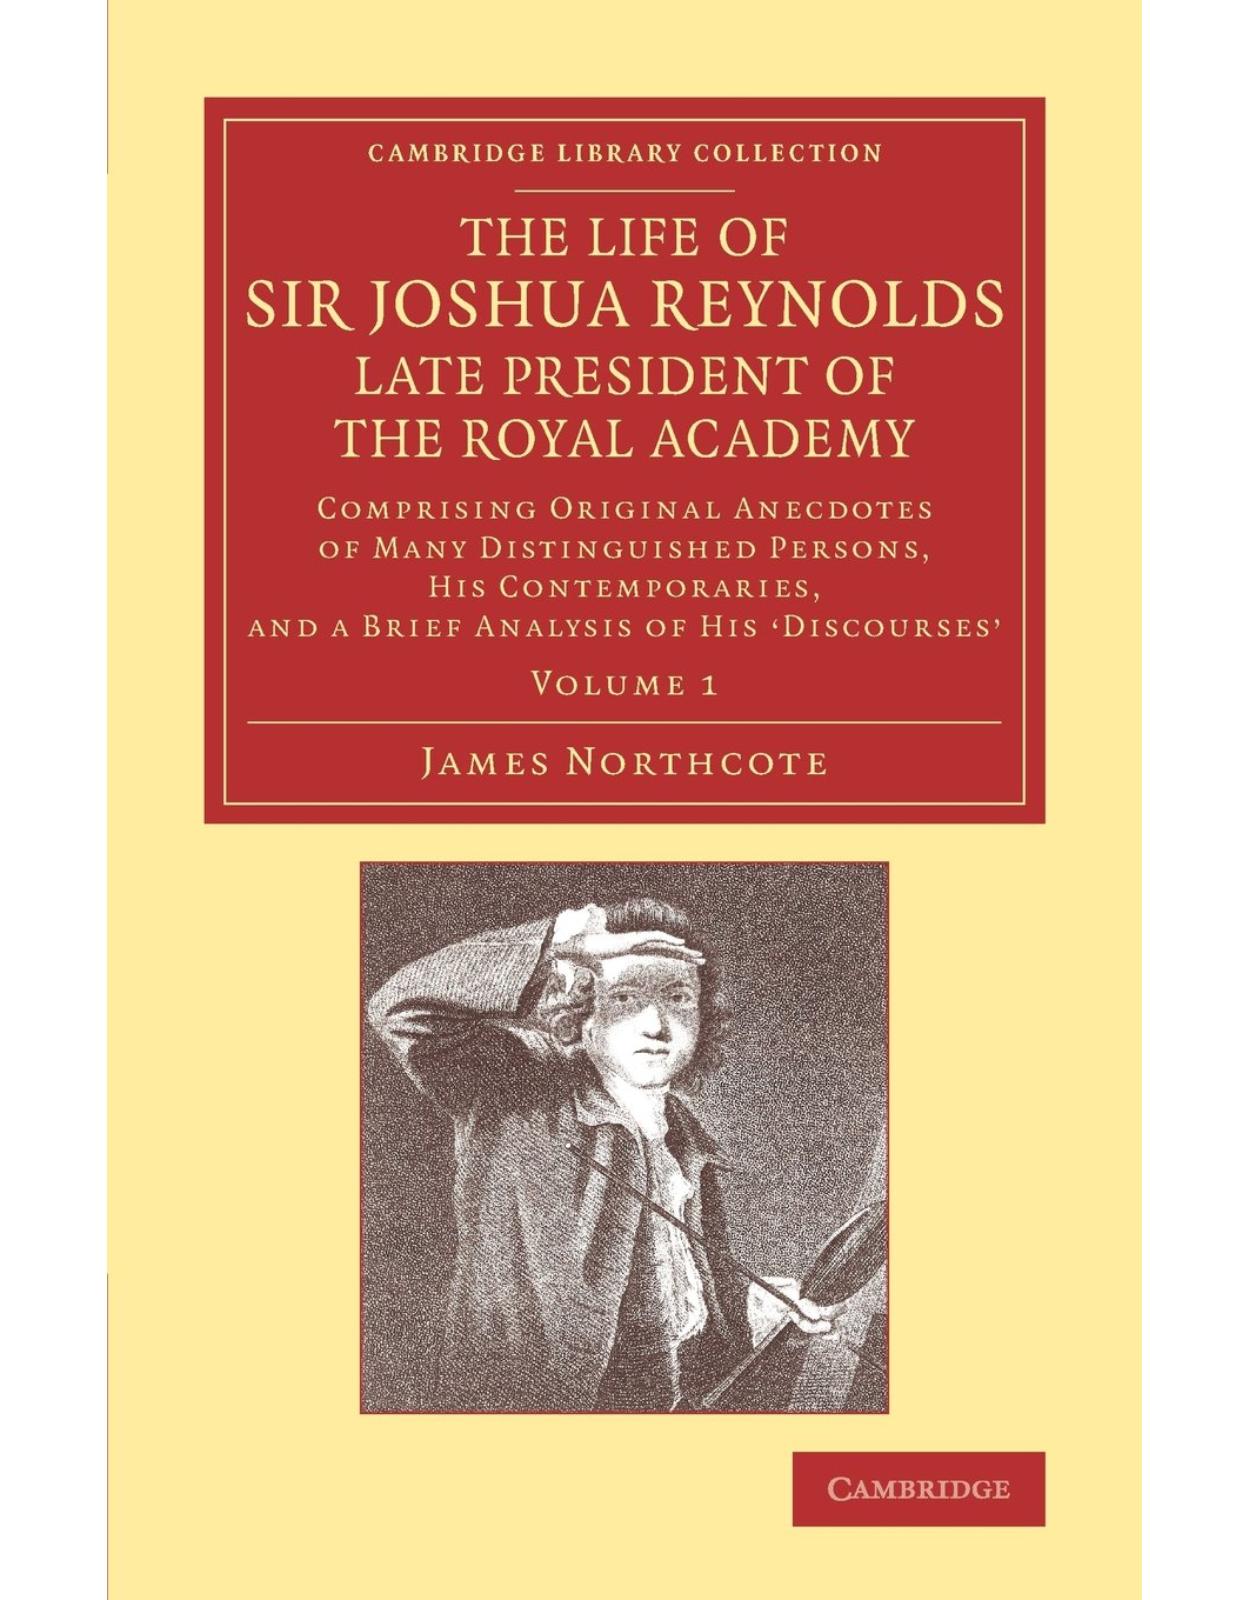 The Life of Sir Joshua Reynolds, Ll.D., F.R.S., F.S.A., etc., Late President of the Royal Academy: Volume 1: Comprising Original Anecdotes of Many Distinguished Persons, his Contemporaries, and a Brief Analysis of his  Discourses 